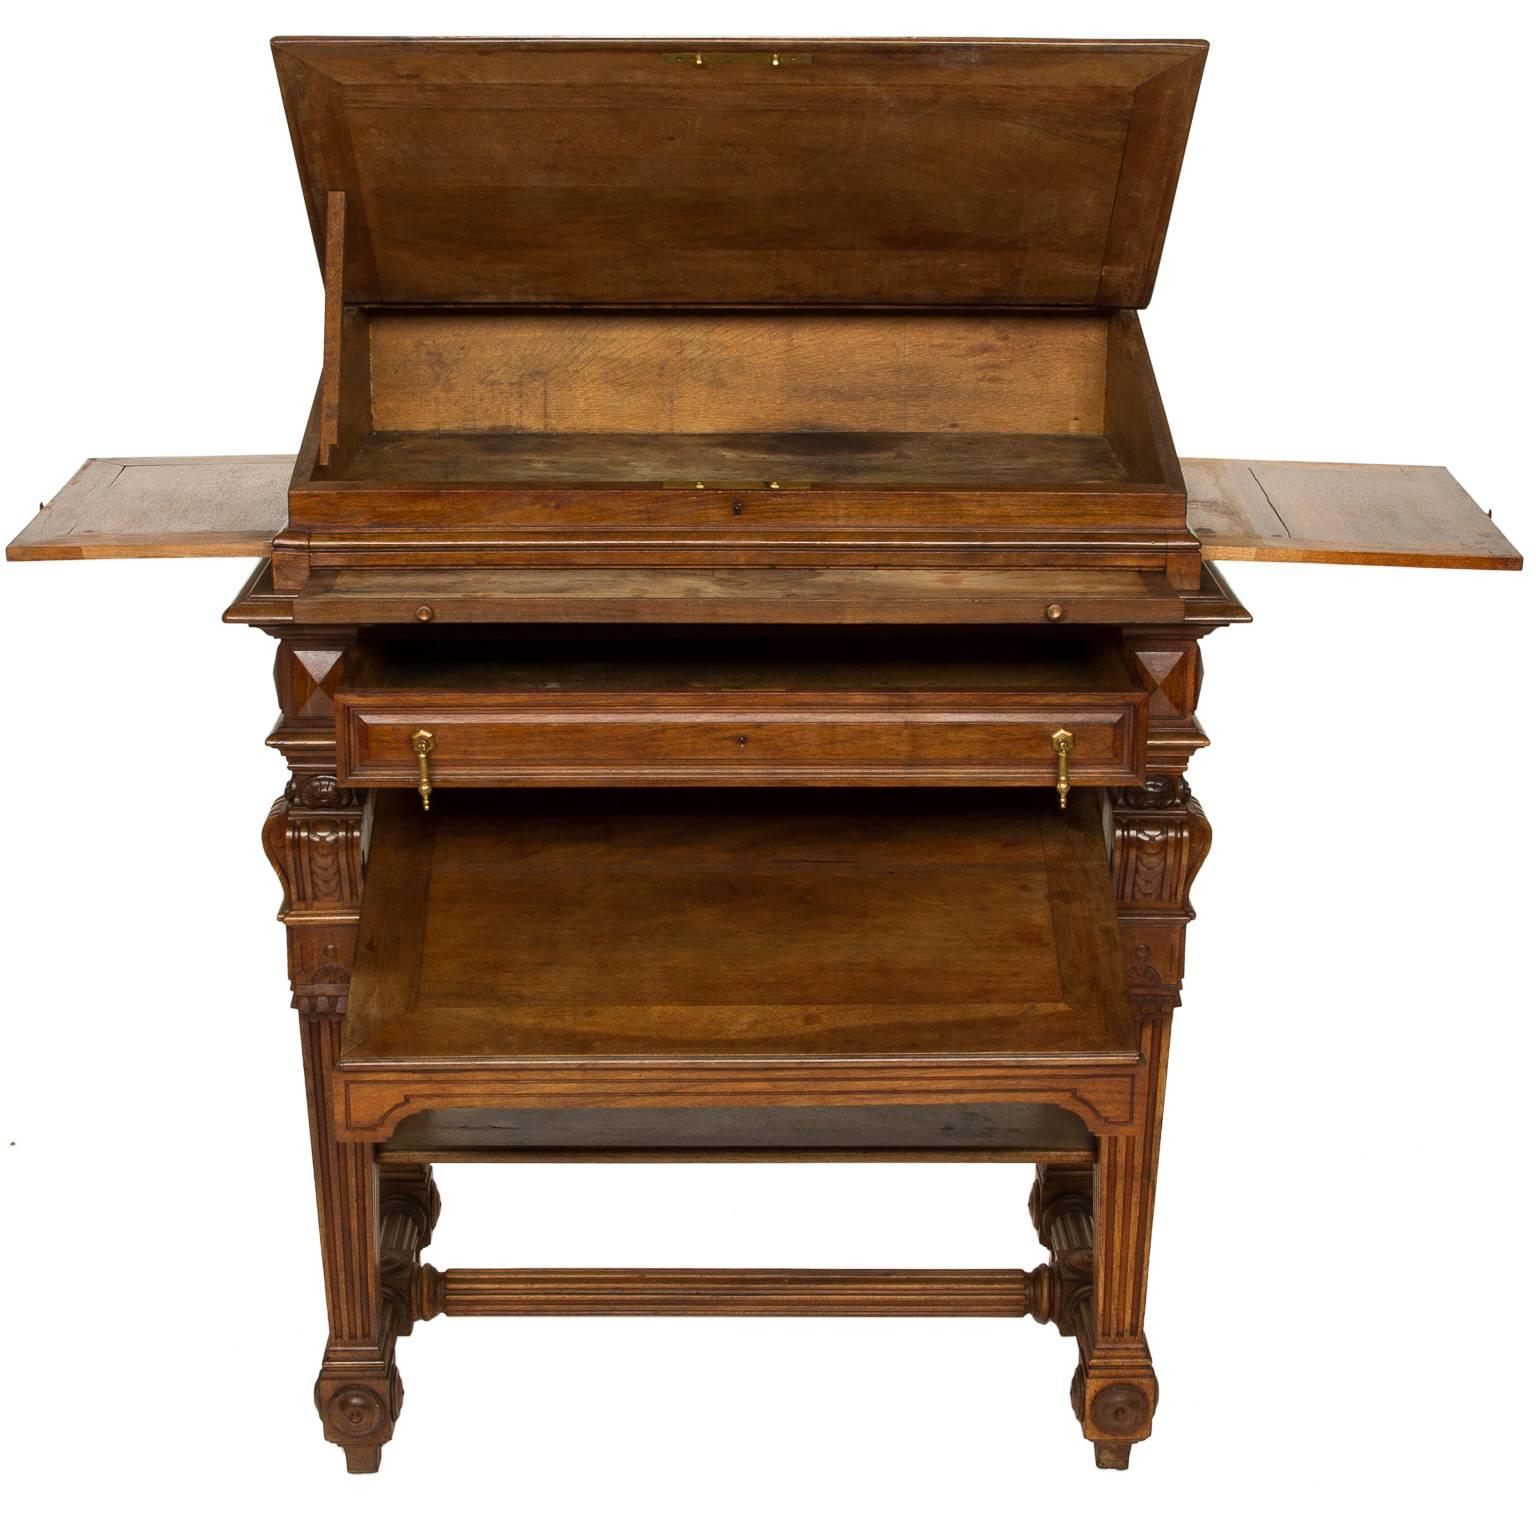 French walnut stand up writing desk in the Renaissance style. The top rest upon the base and is slanted with a lift surface revealing storage. In between the writing slope and base, is a pull-out writing surface and two pull-out candle slide on the